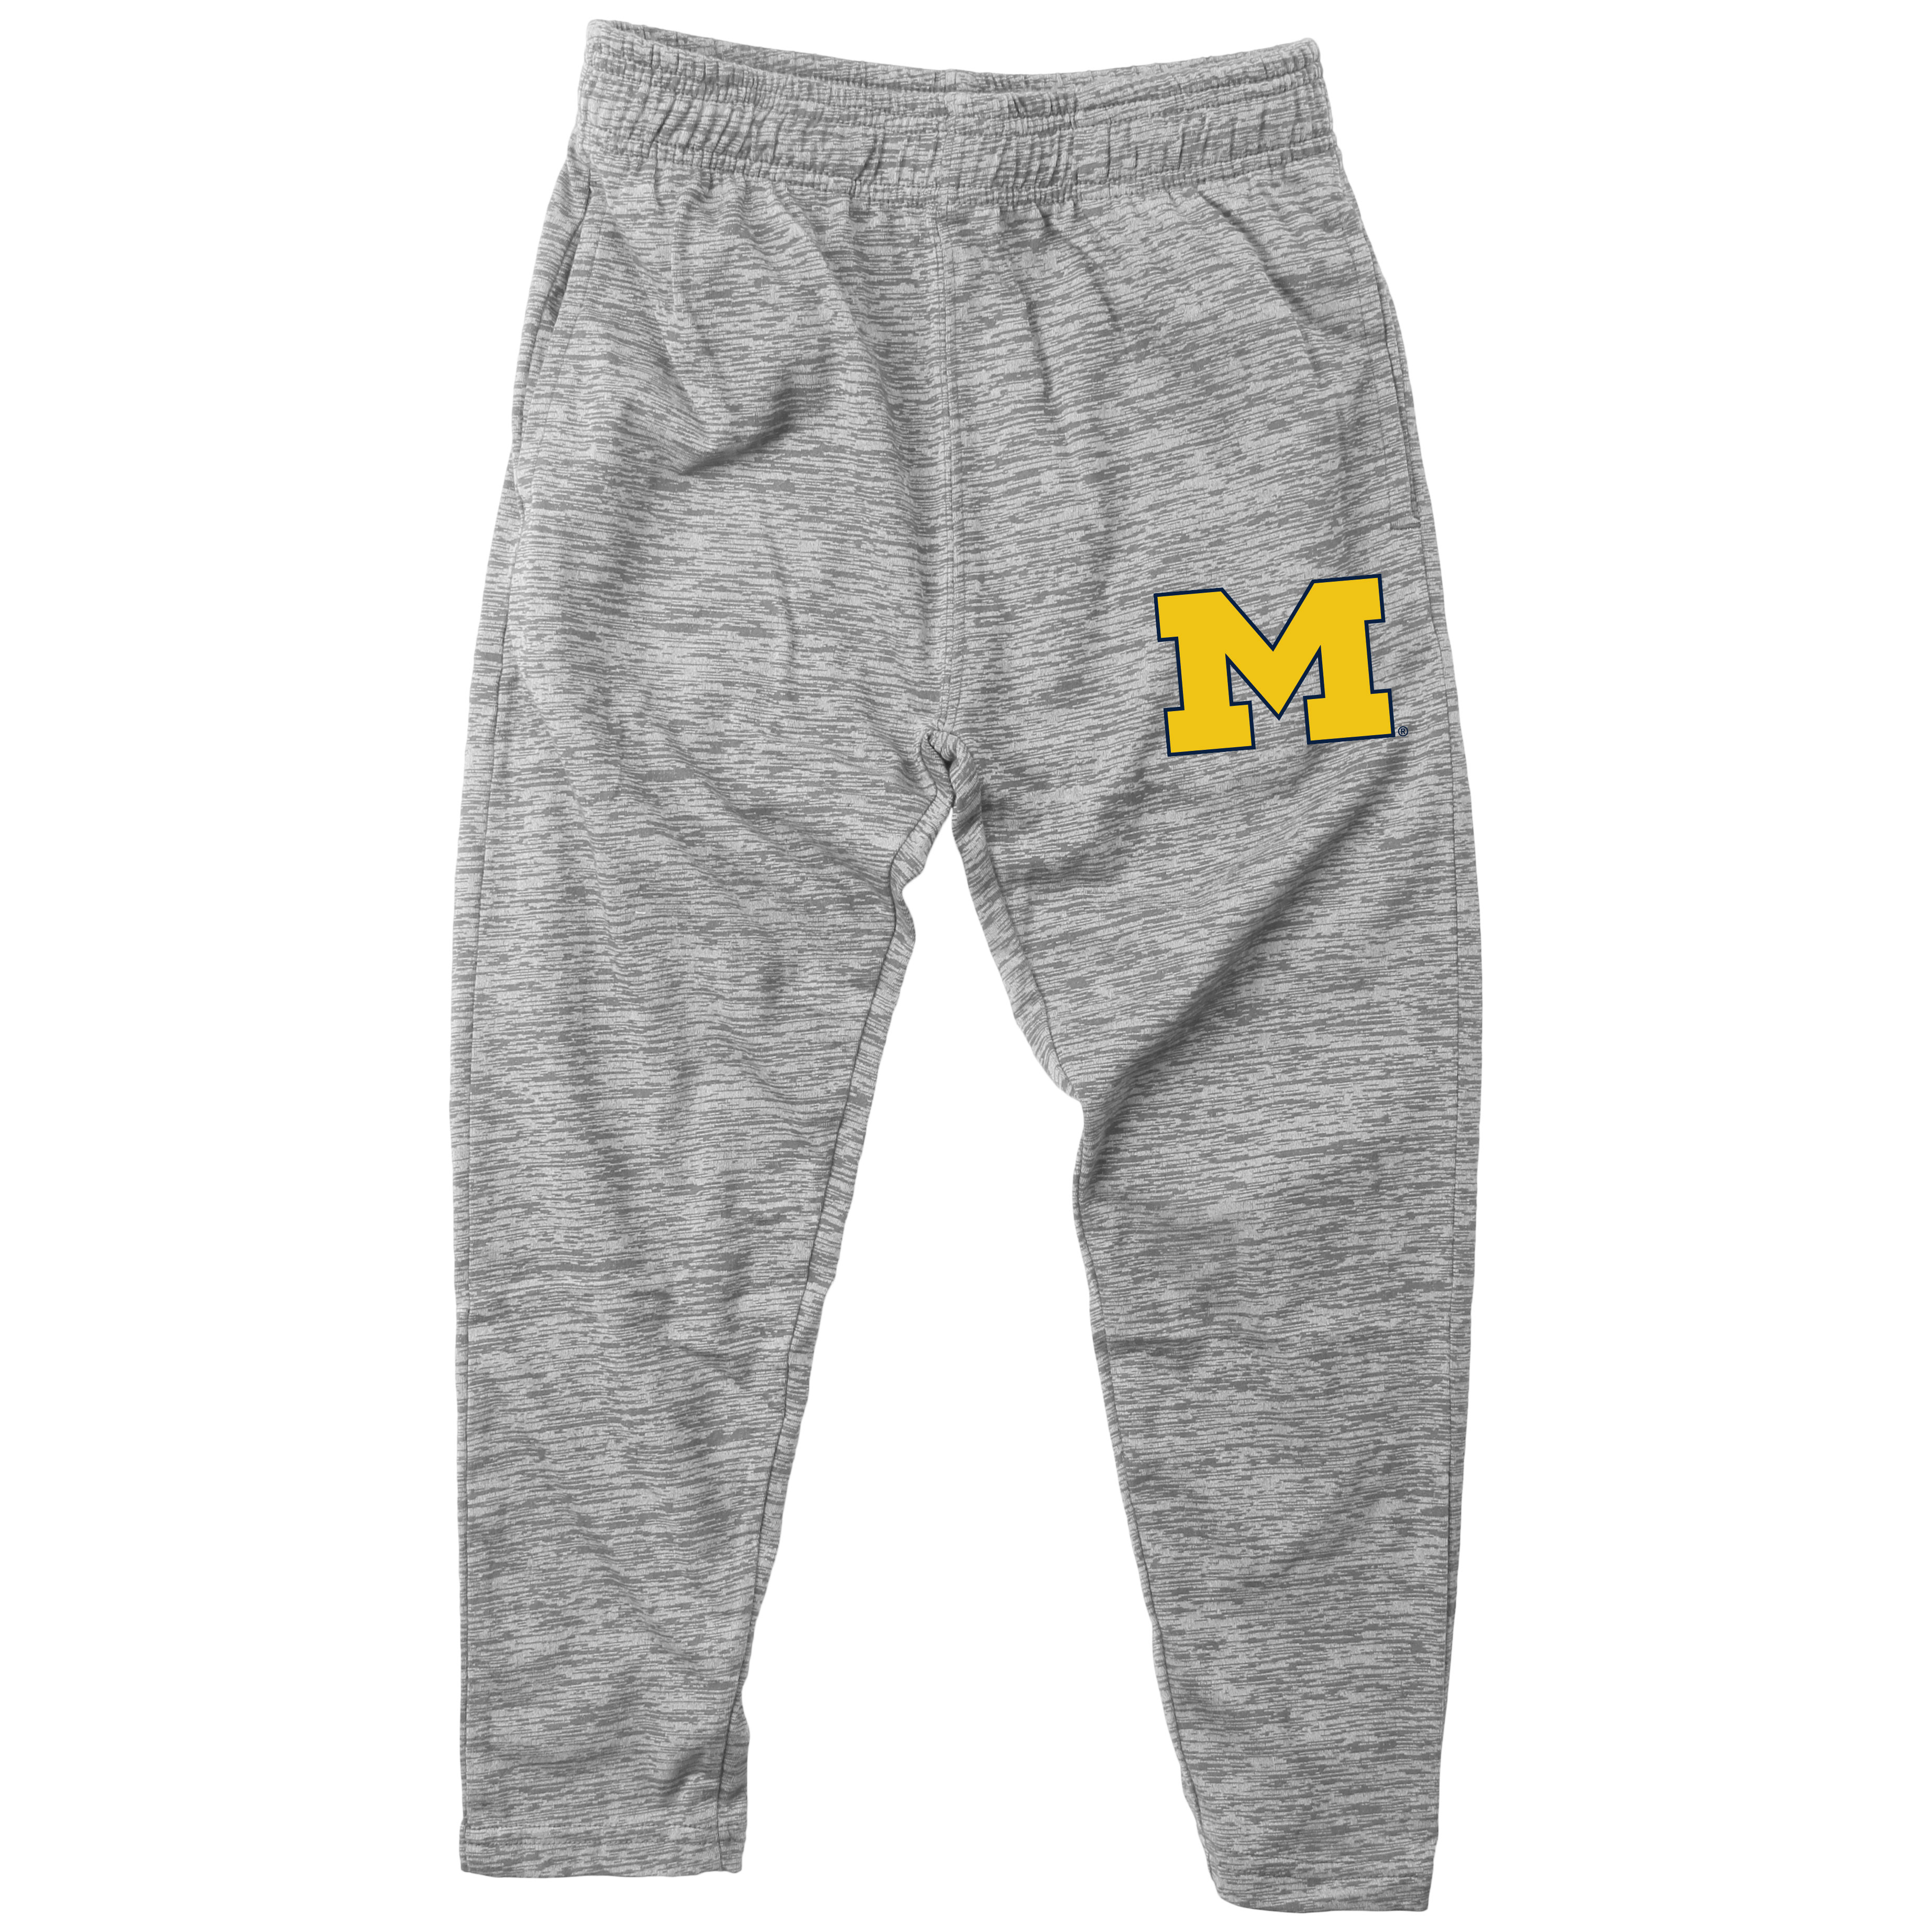 Wes And Willy Michigan Wolverines Youth Boys Cloudy Yarn Athletic Pant